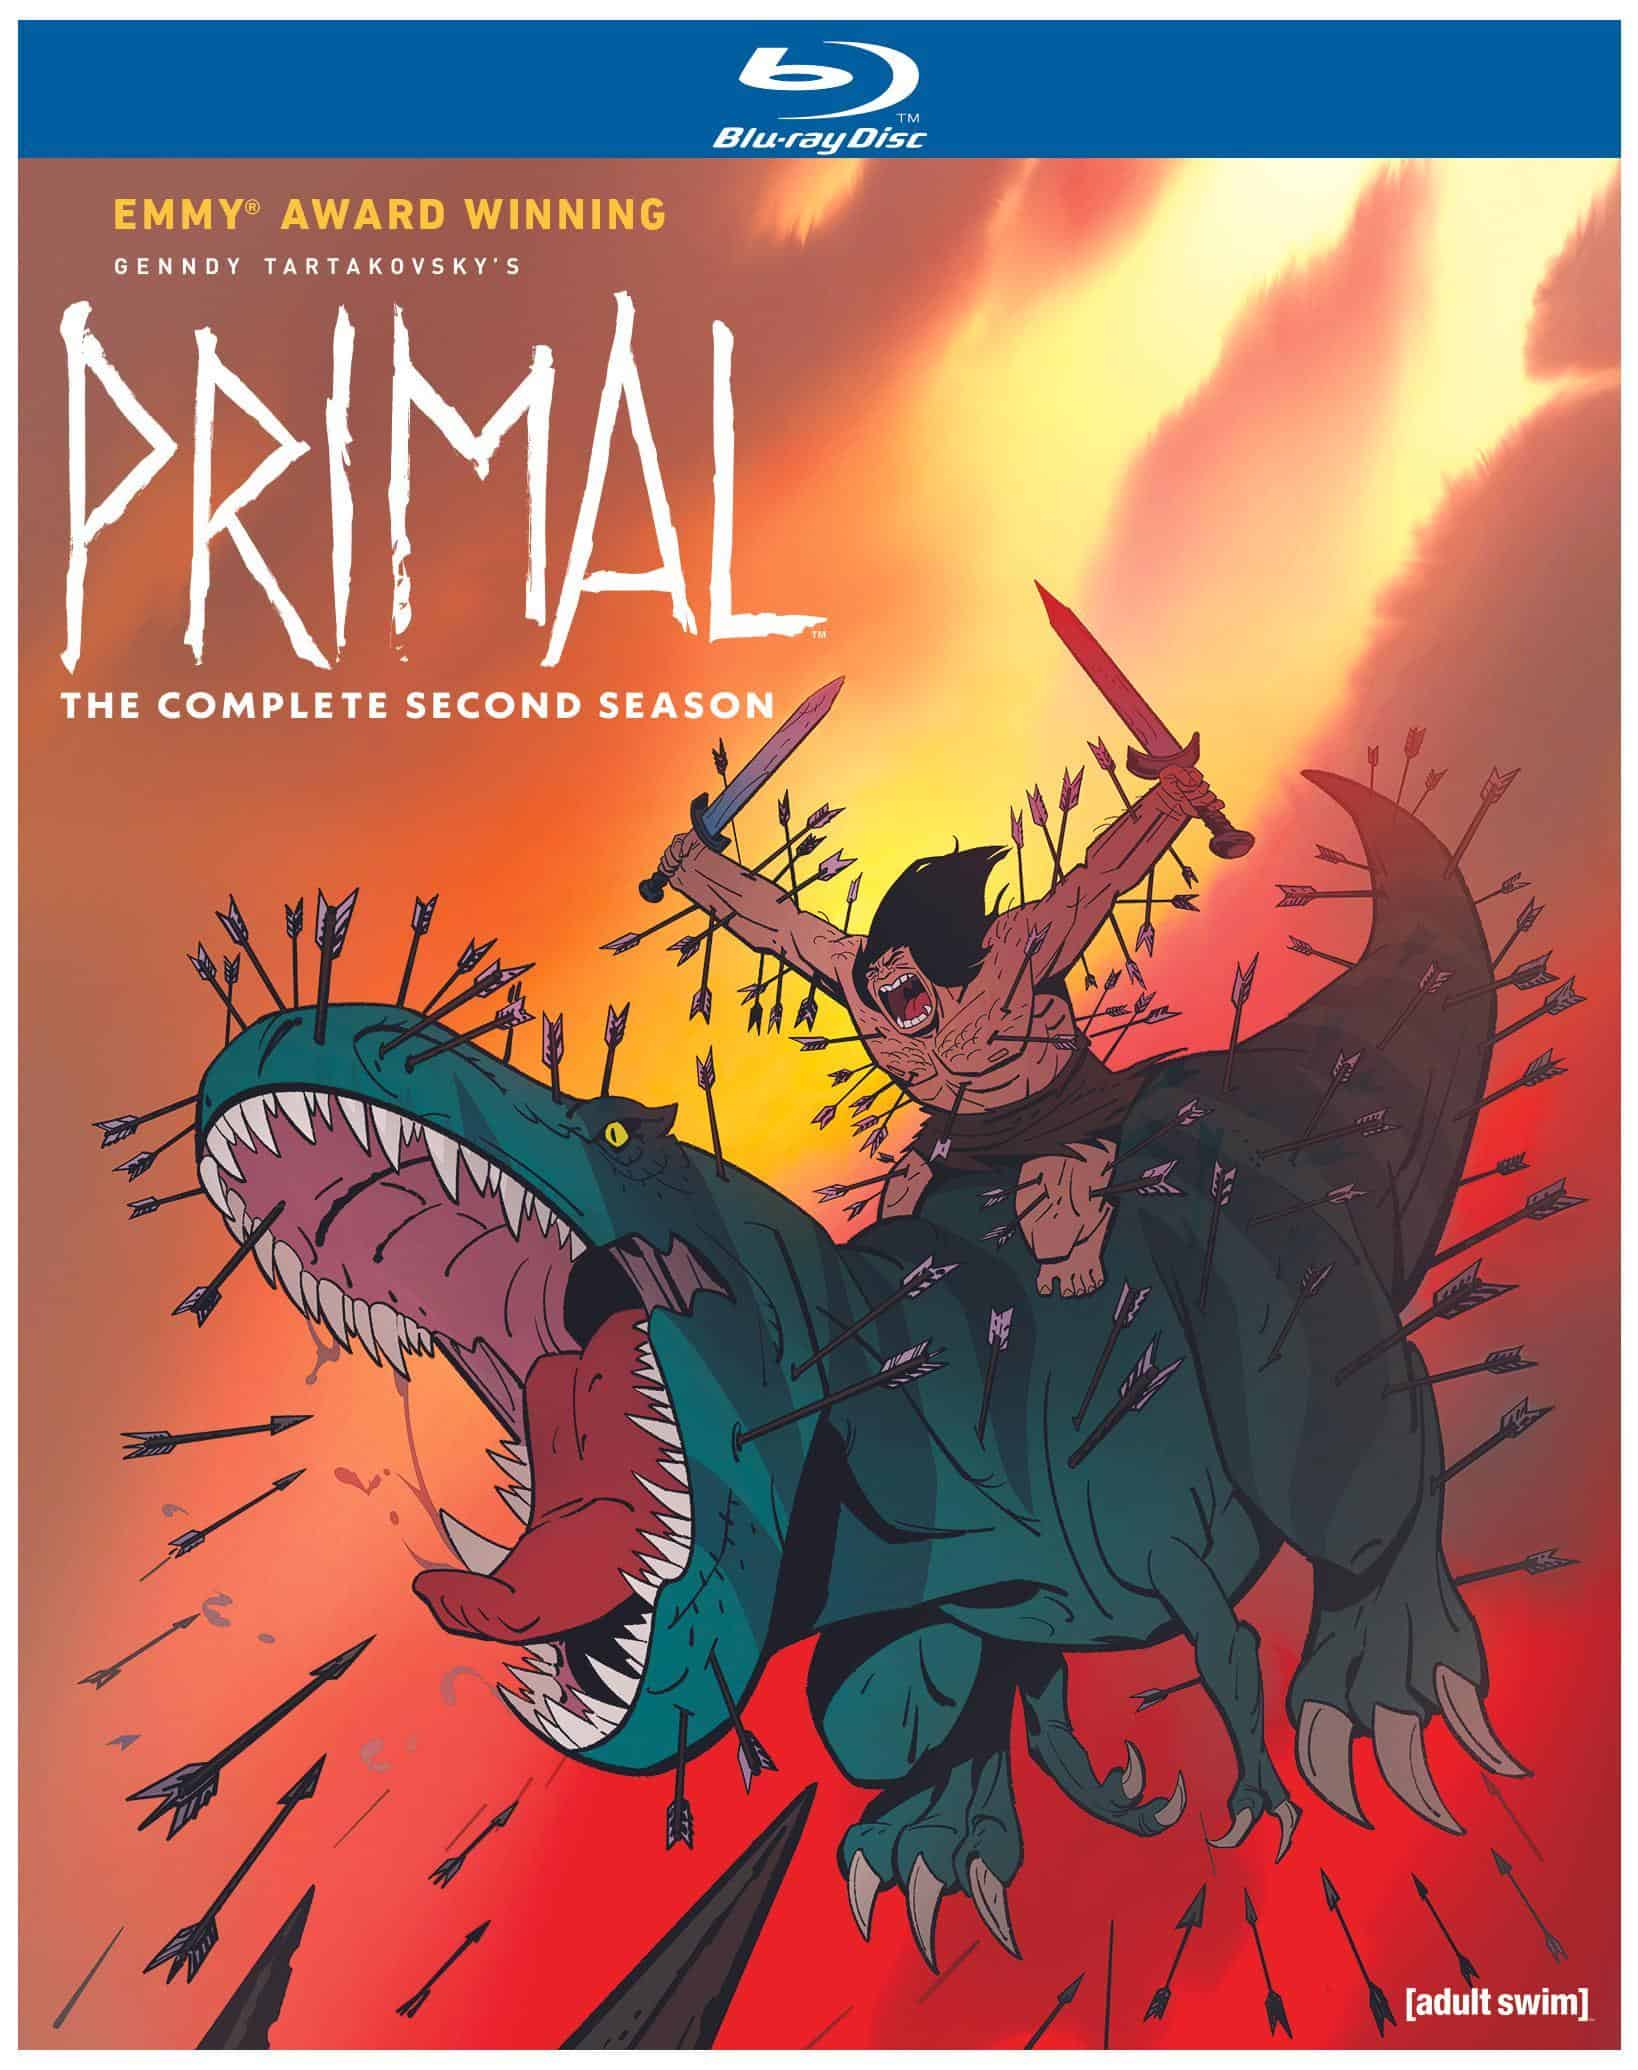 Primal: The Complete Second Season comes to Blu-ray April 25th 21